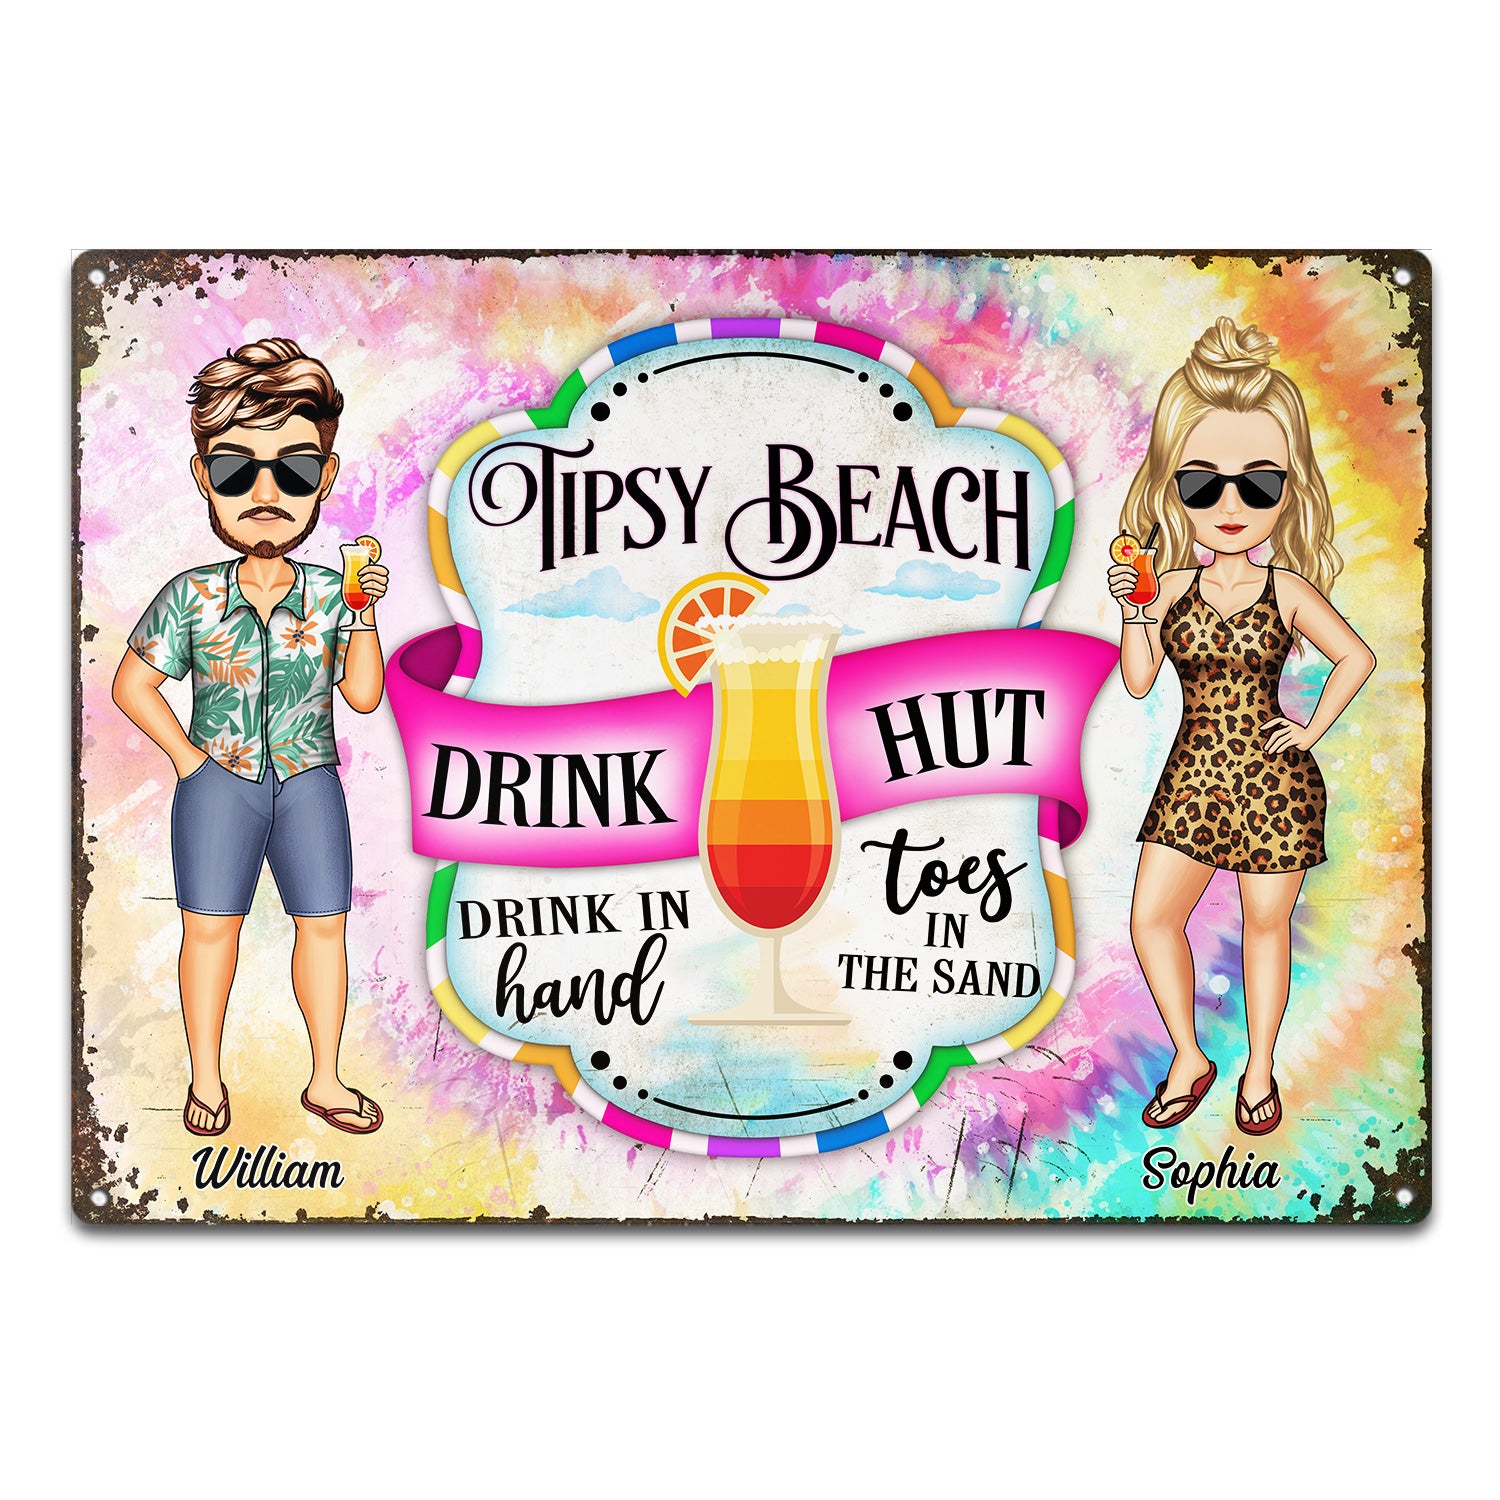 Tipsy Beach Drink Hut Drink In Hand Toes In The Sand - Homewarming, Birthday, Home Decor Gift For Couple, Family, Friend, Husband, Wife - Personalized Classic Metal Signs